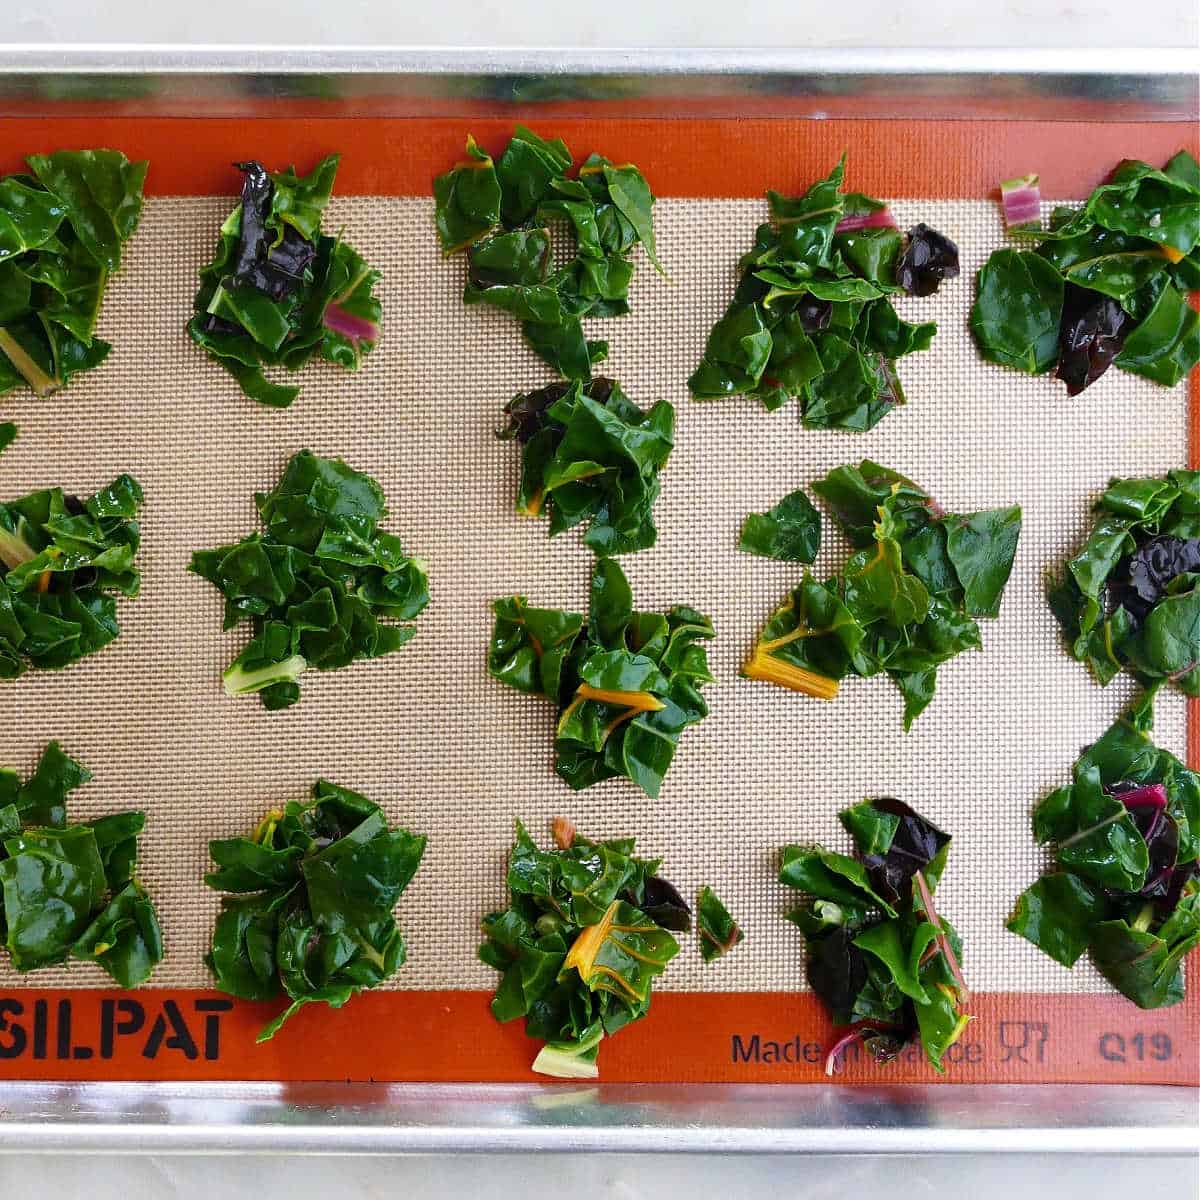 blanched chard leaves spread on a baking sheet before being frozen